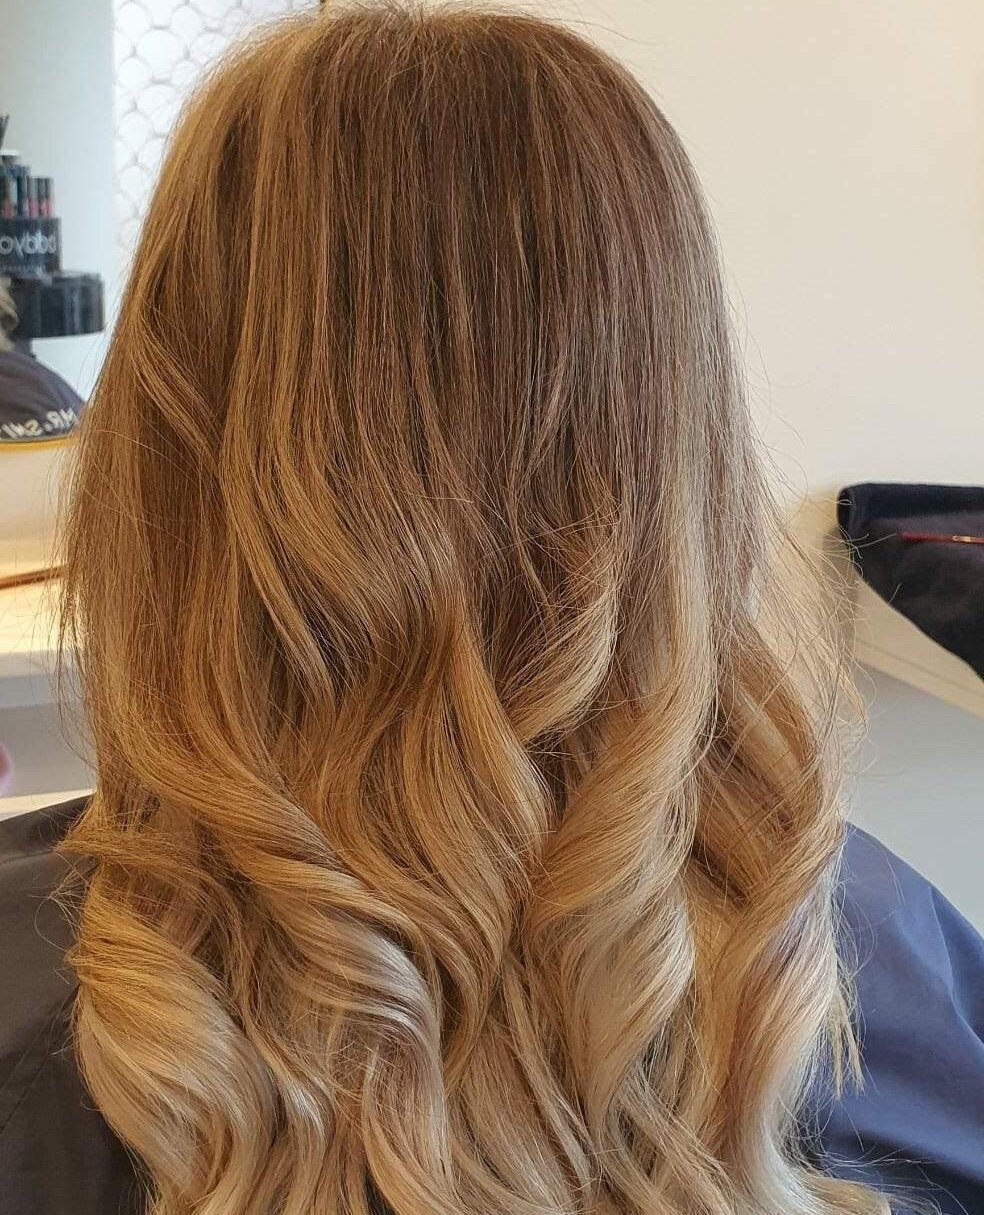 Soft balayage by Teresa 😍⁠
Book your hair refresh today!